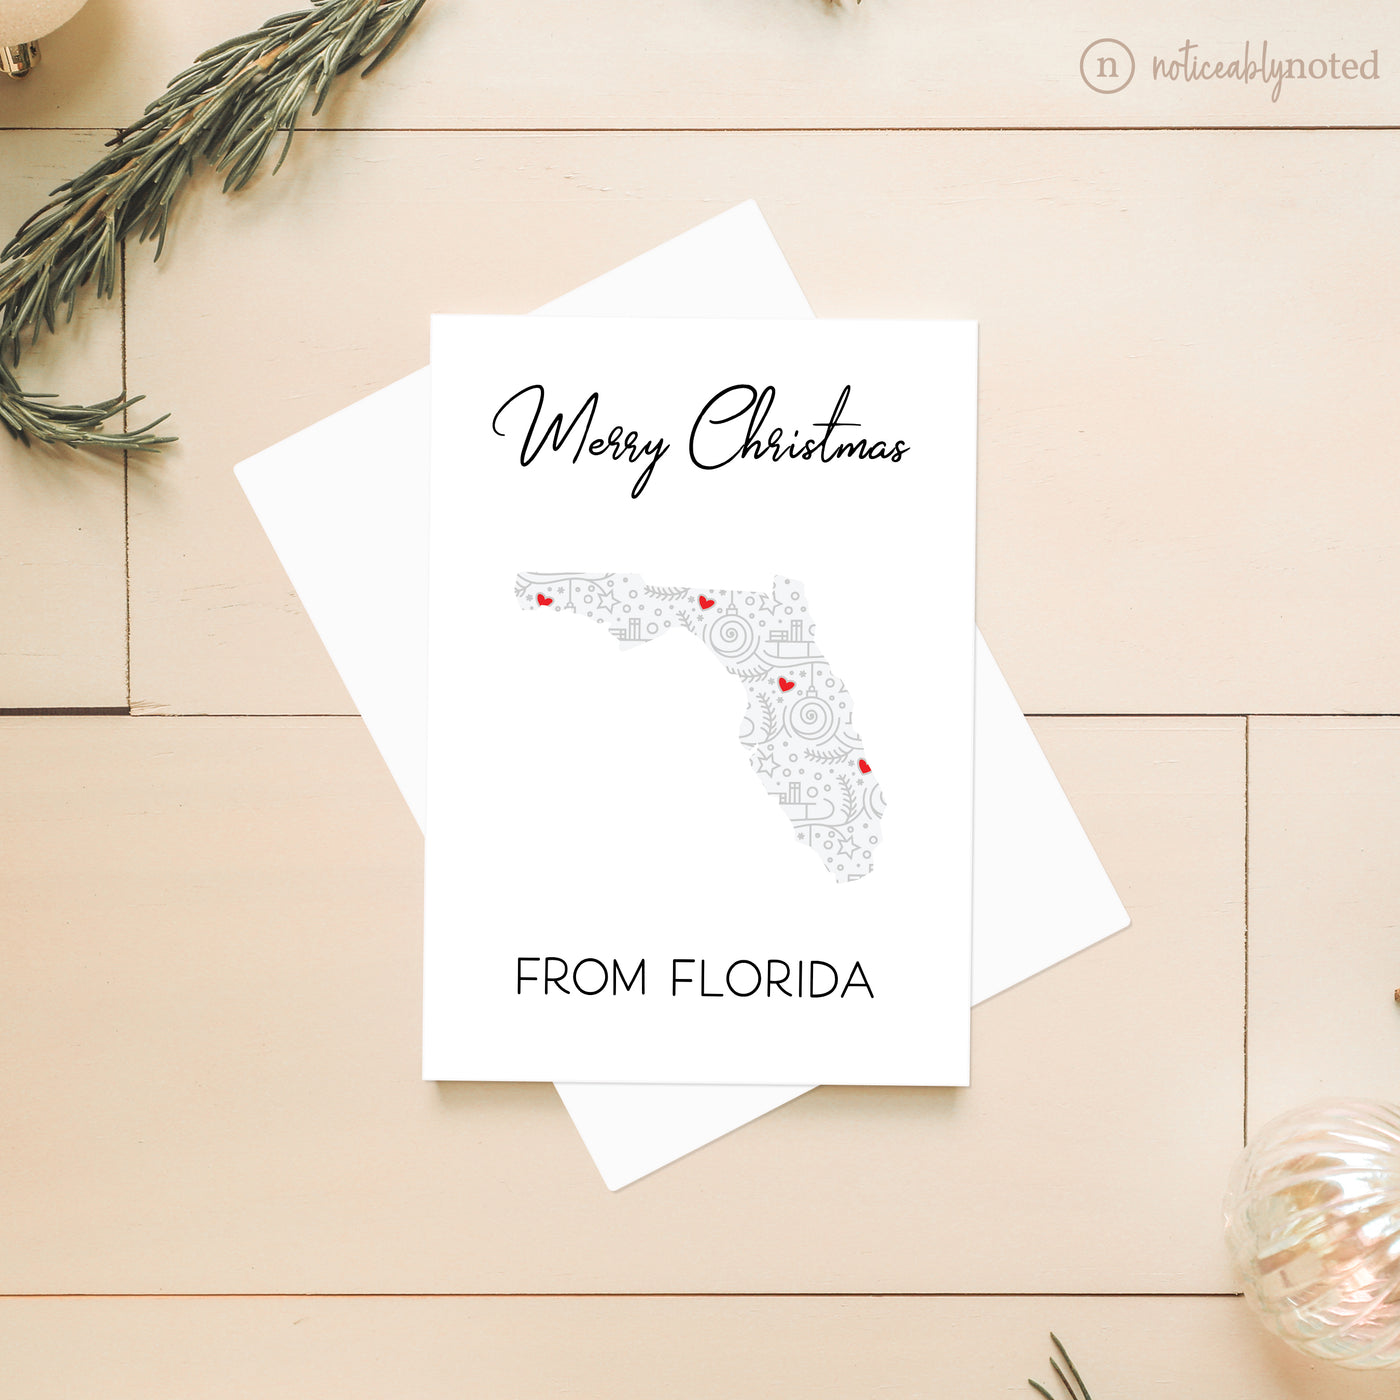 Florida Christmas Cards | Noticeably Noted